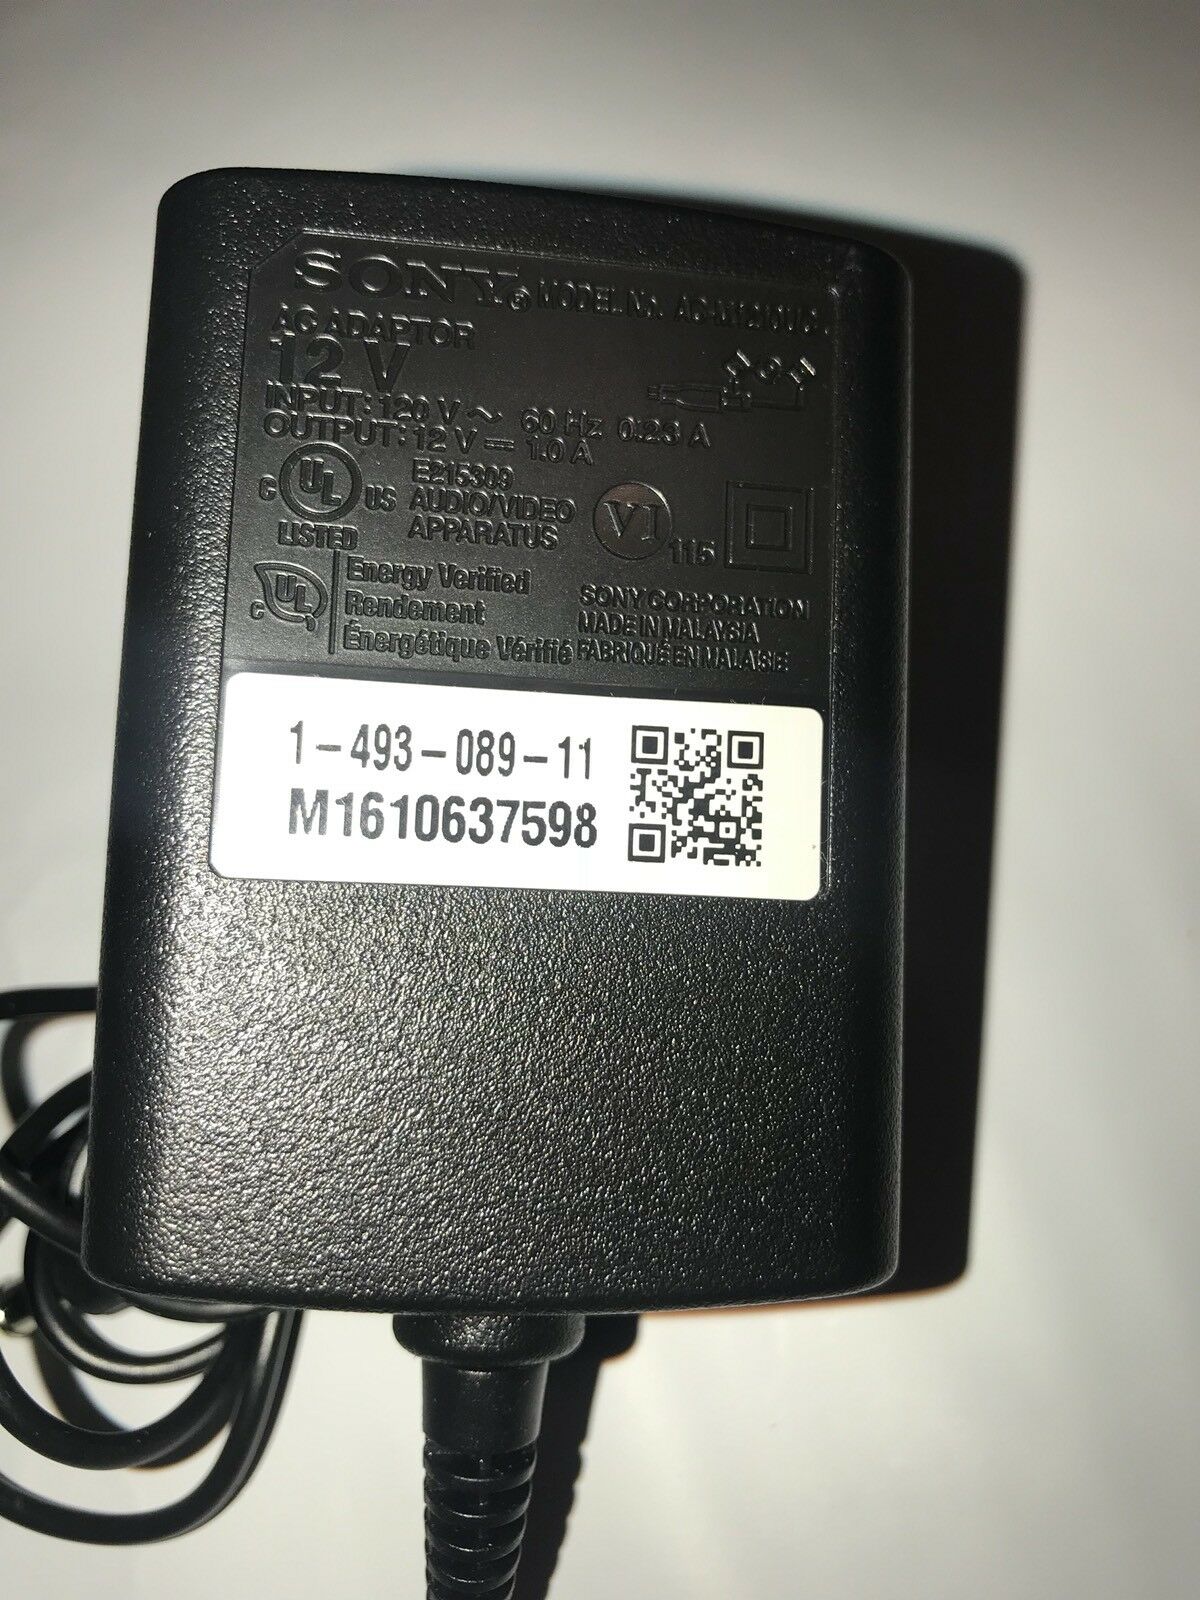 New Sony AC-M1210UC 1-493-089-11 Power Adapter 12v 1.0A for Sony Bluray Players